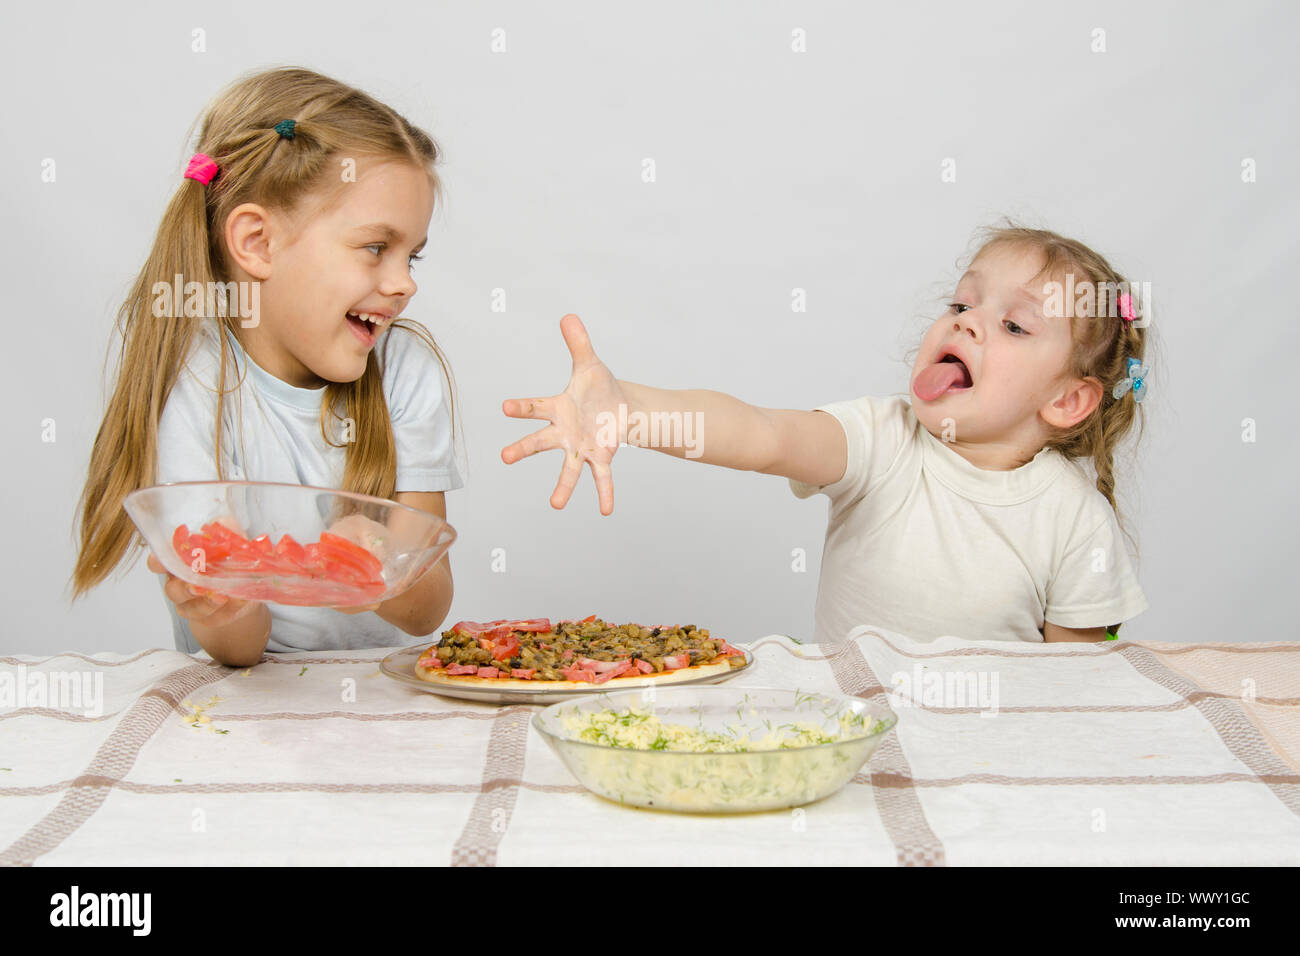 Two little girls at a table prepared pizza. One with a whimsical view stretches a hand to a plate with tomatoes, which takes the Stock Photo